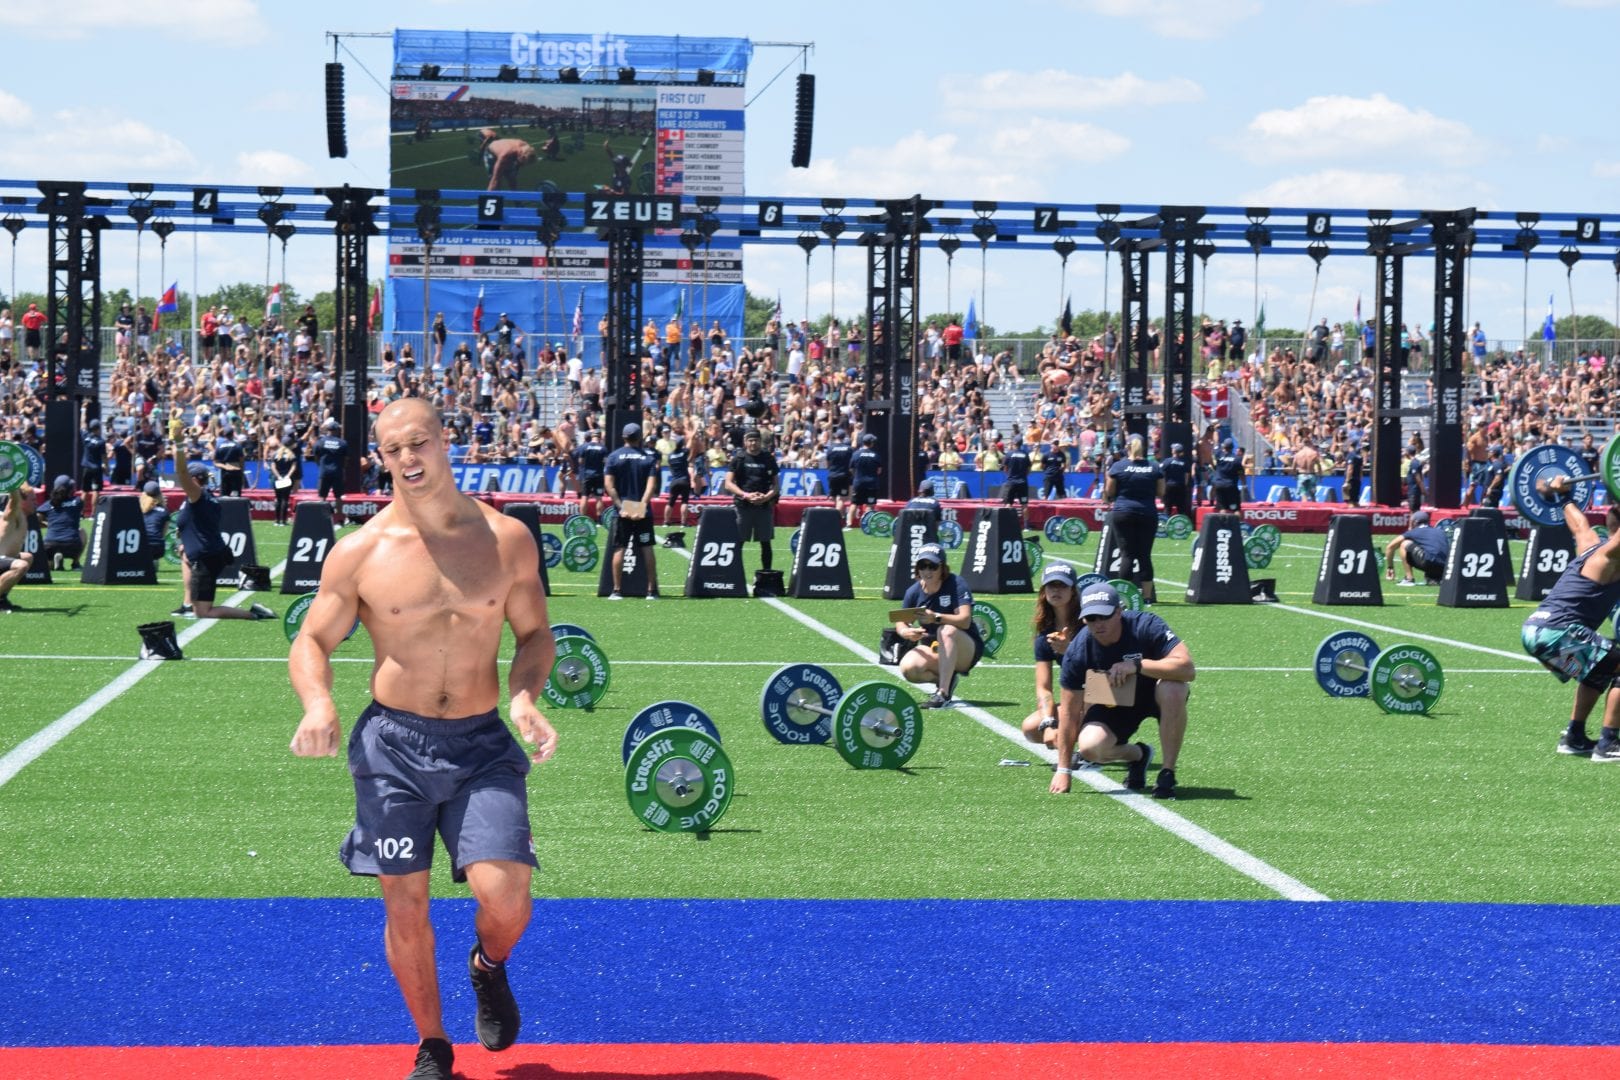 Cole Sager crosses the finish line during the first event of the 2019 CrossFit Games